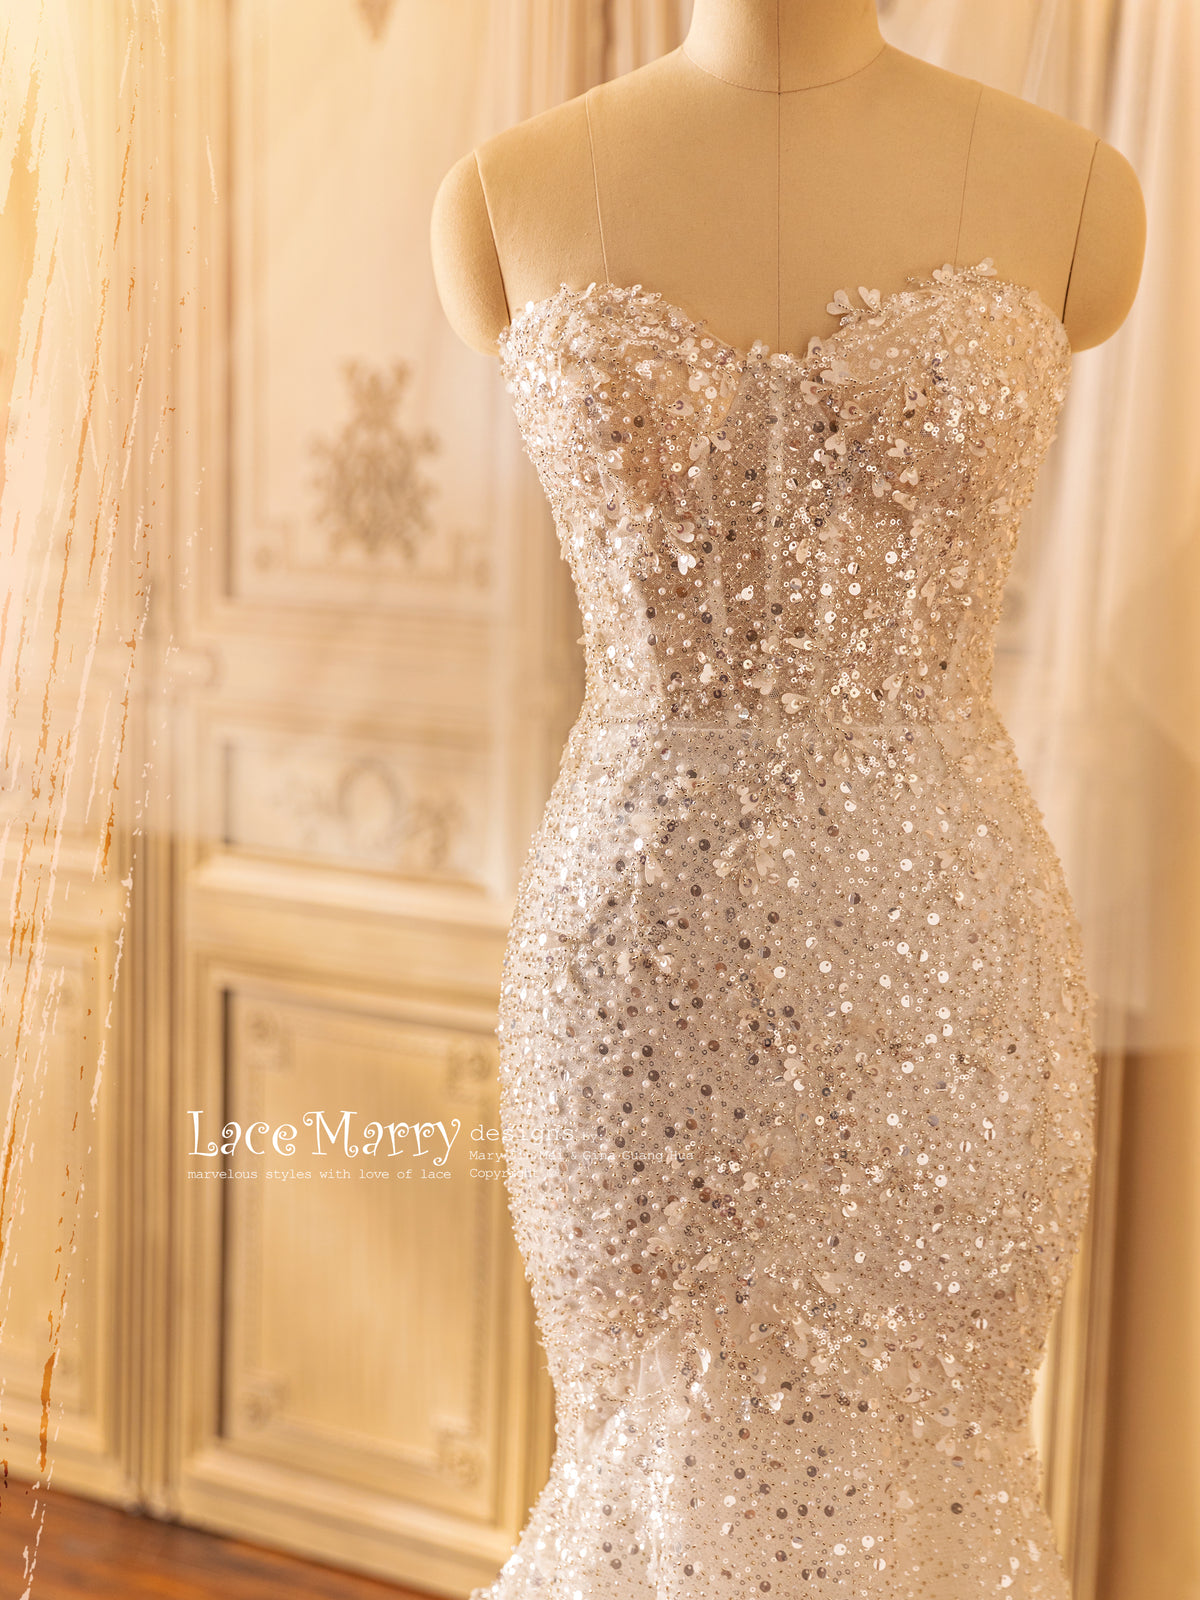 Amazing Beaded and Sequined Dress  Edit alt text